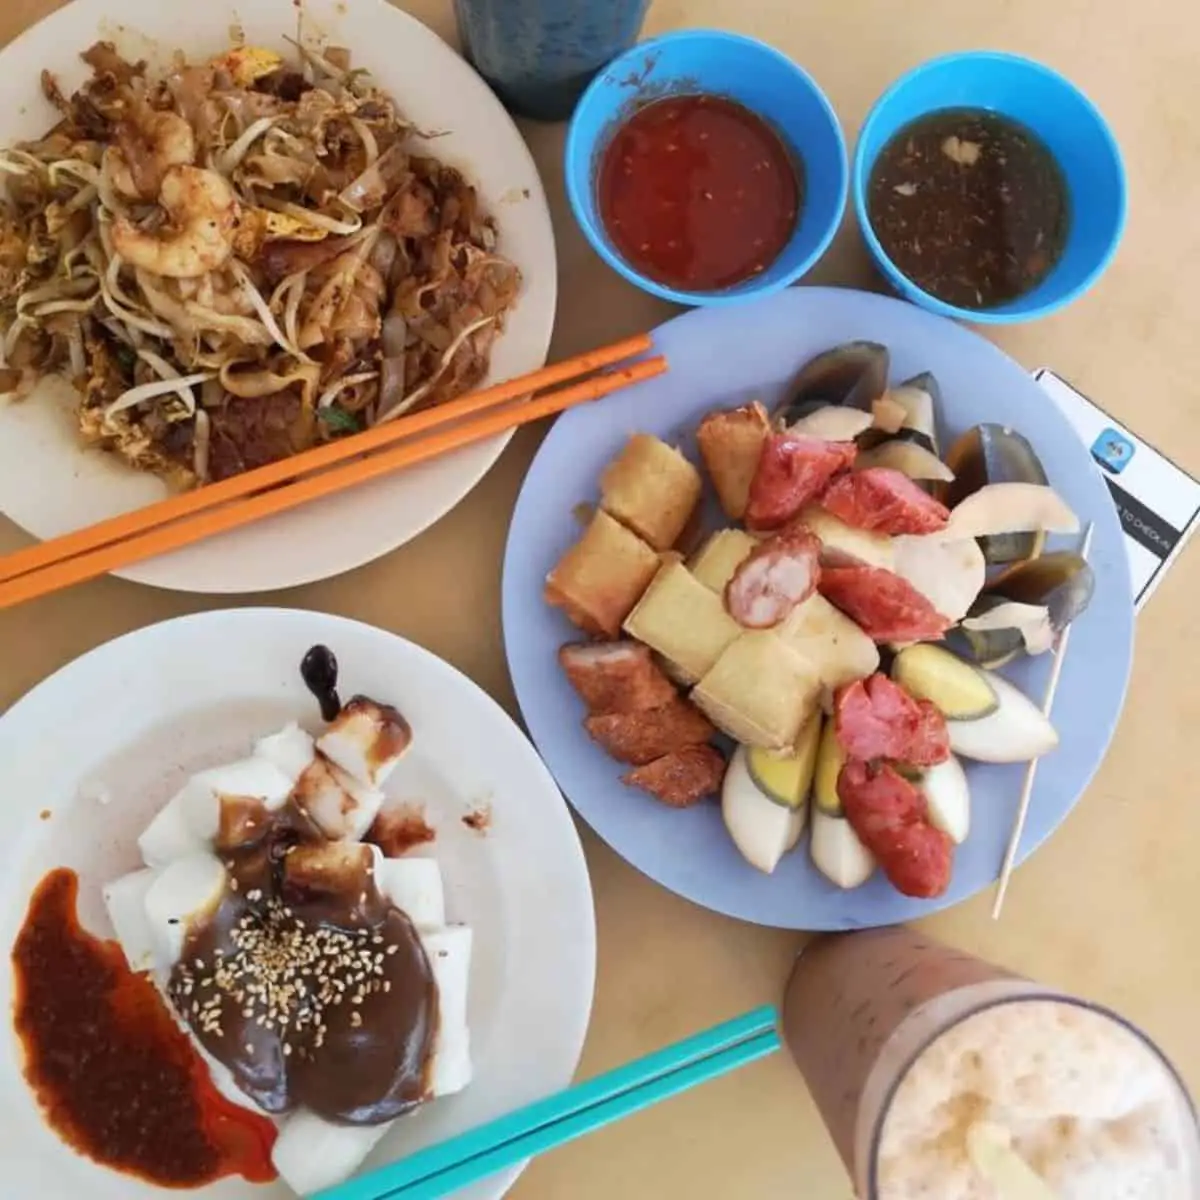 Genting cafe char kuey teow and chee cheong fun